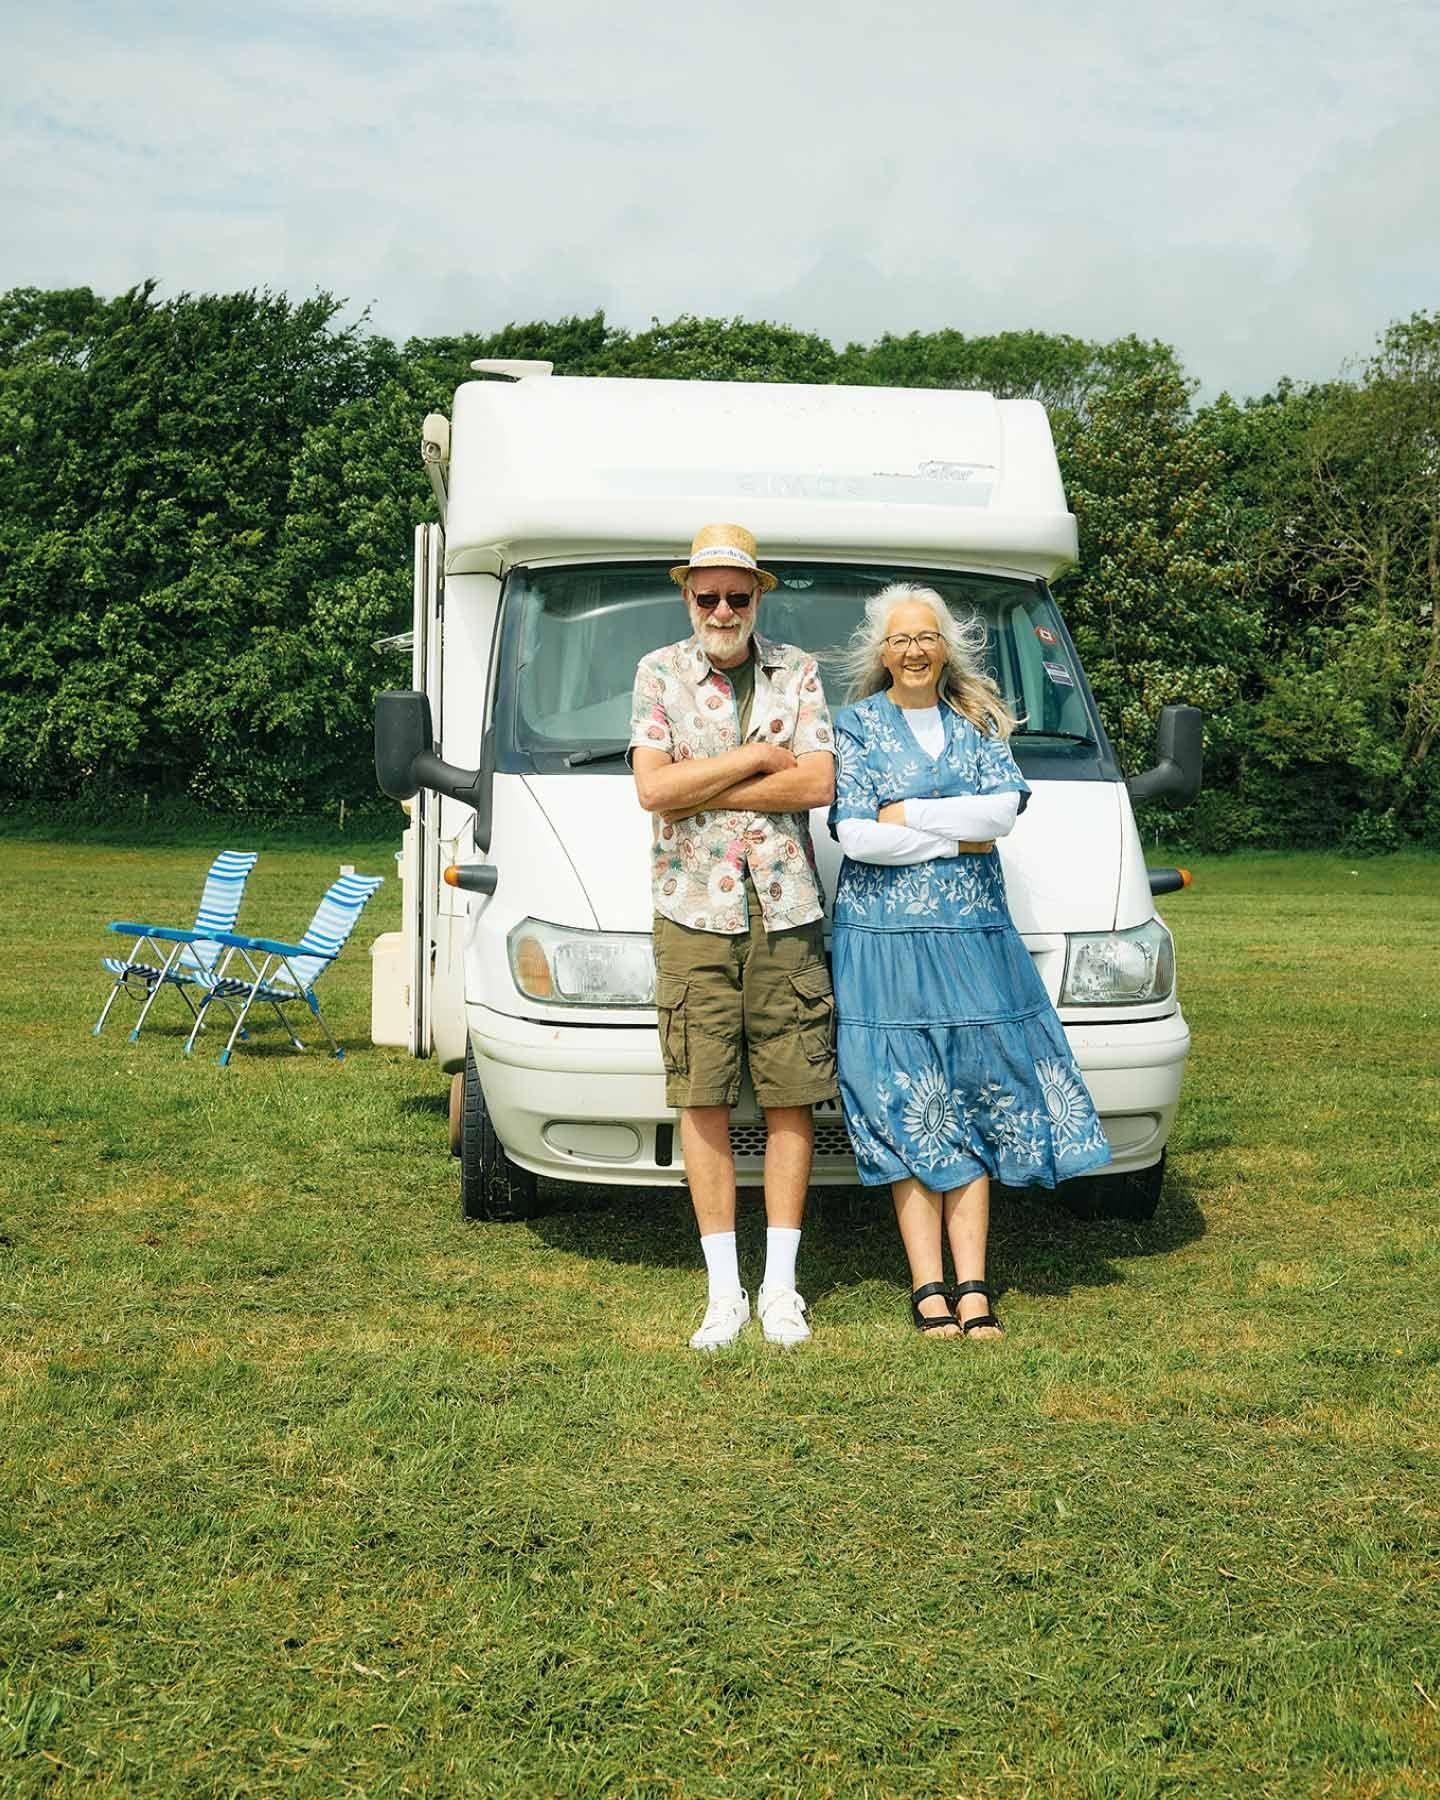 A men wearing green shorts and a woman wearing a blue dress in front of their camper van